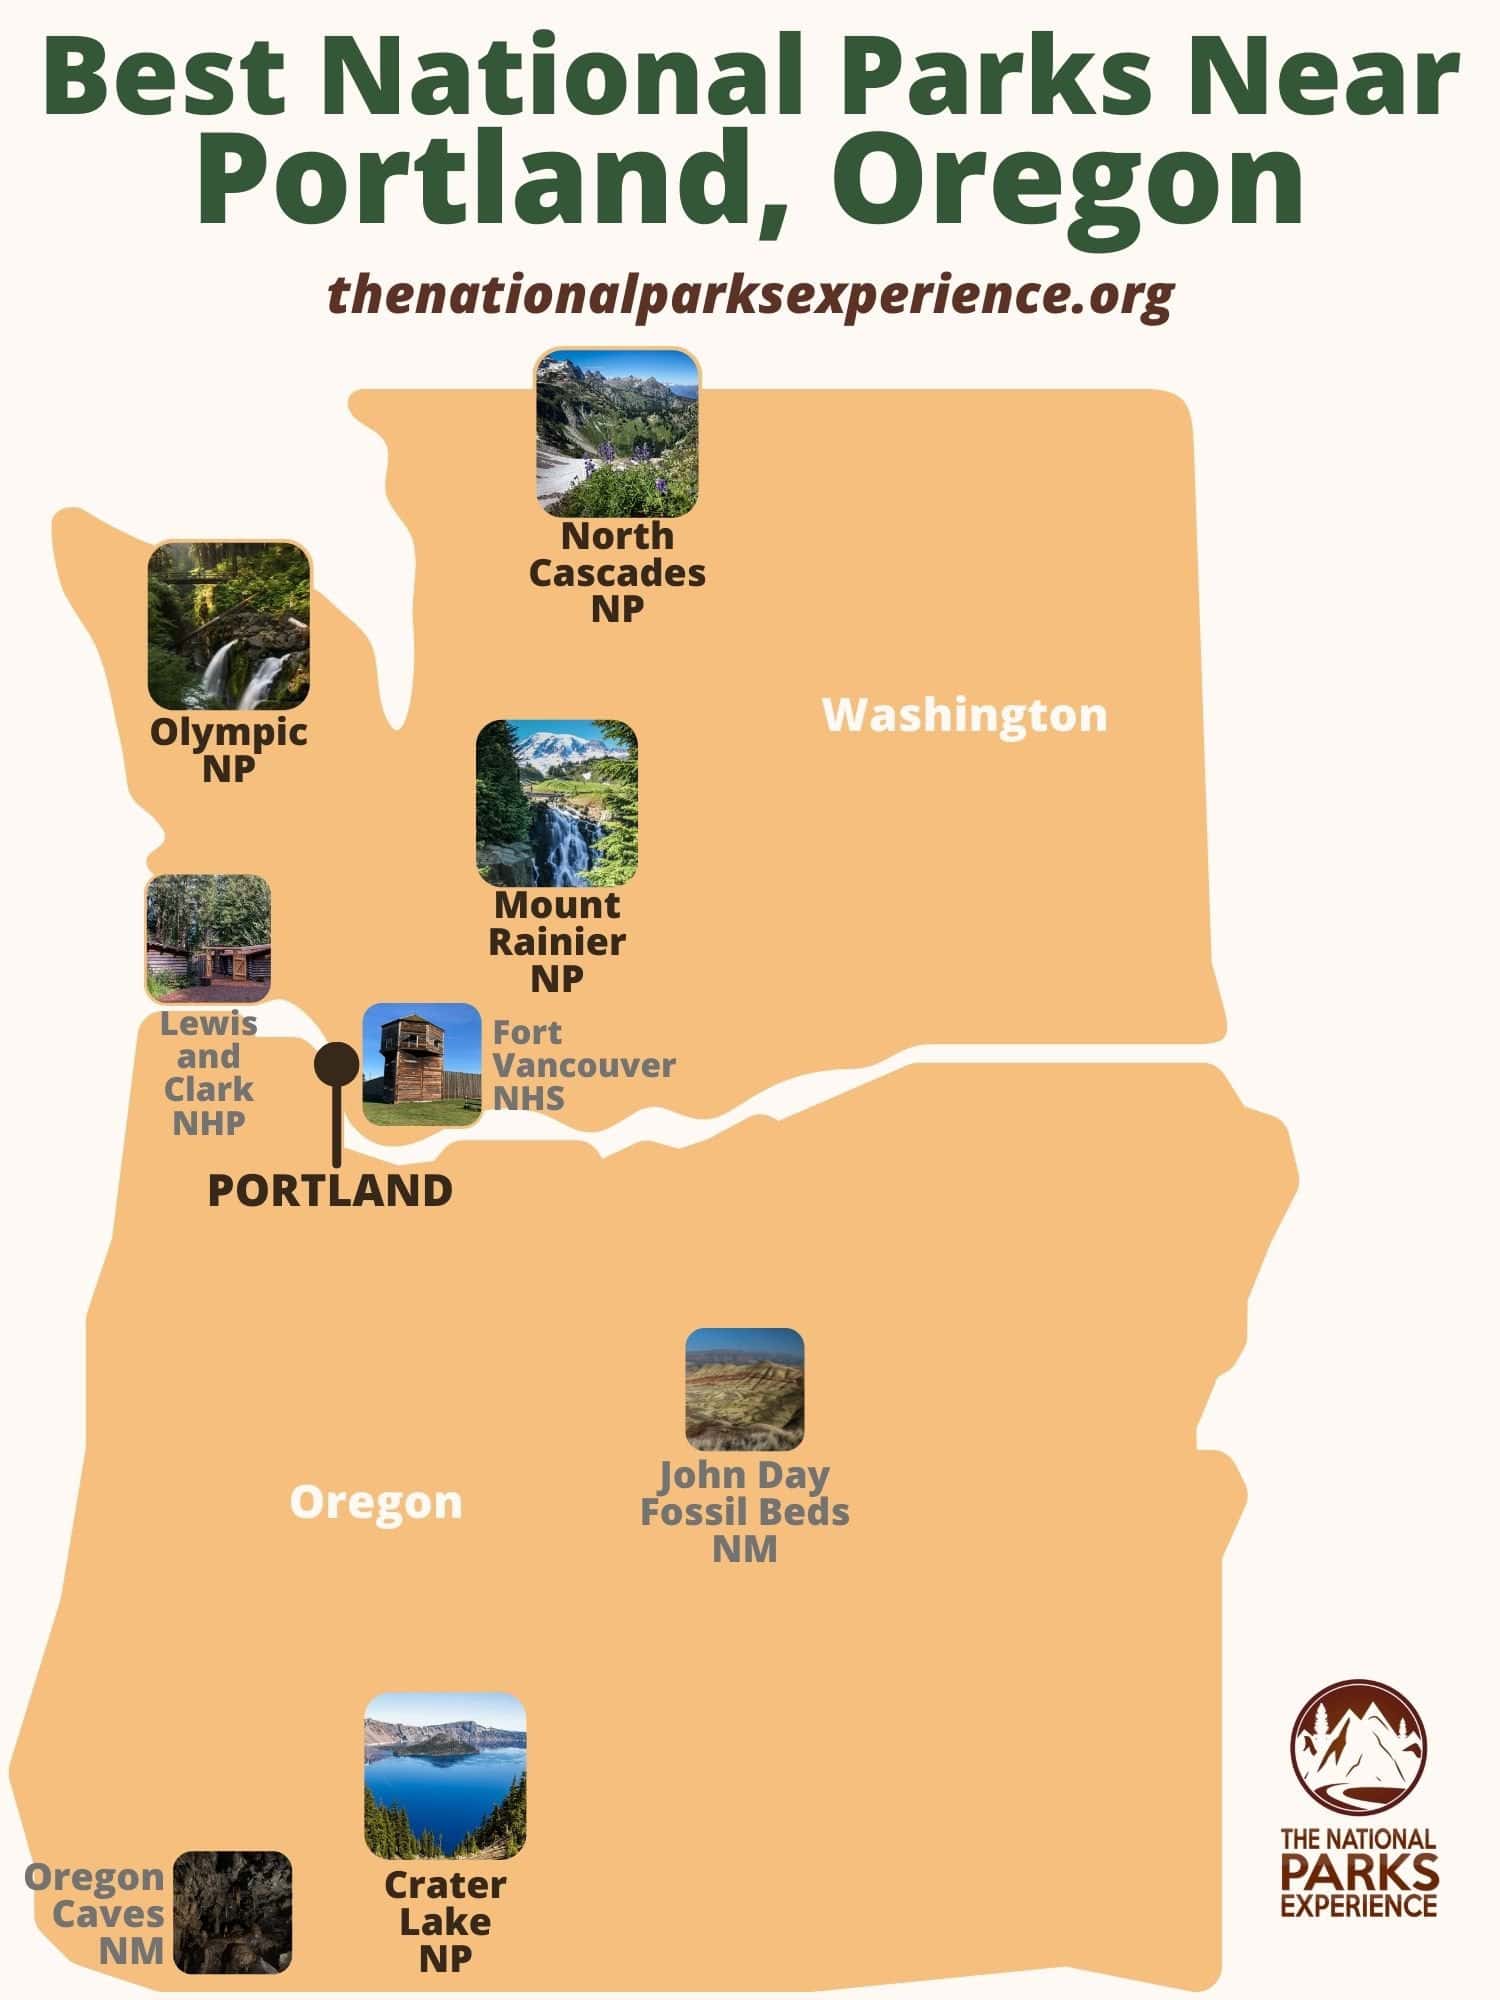 Map of the Best National Parks Near Portland, Oregon